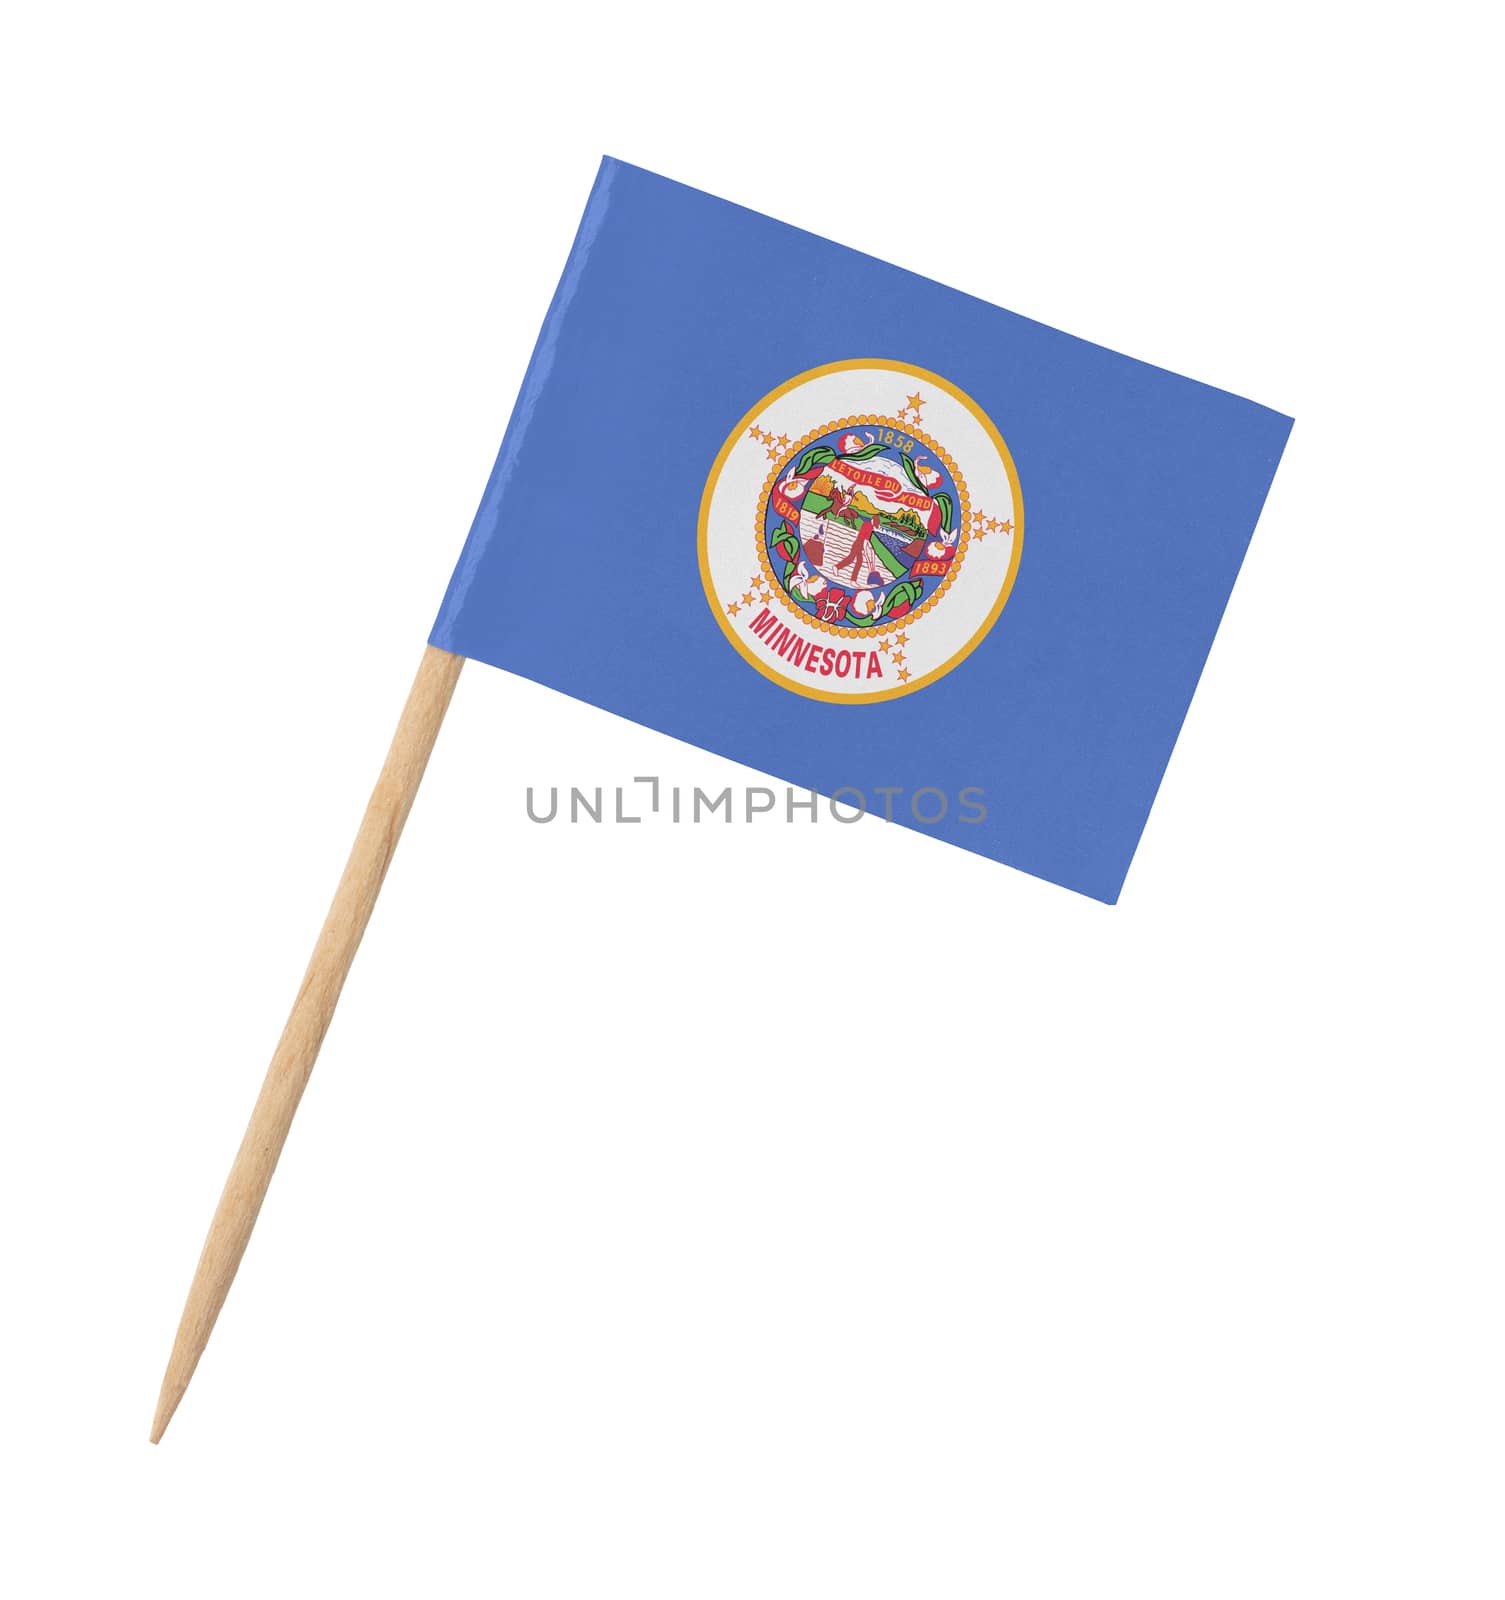 Small paper US-state flag on wooden stick - Minnesota - Isolated on white